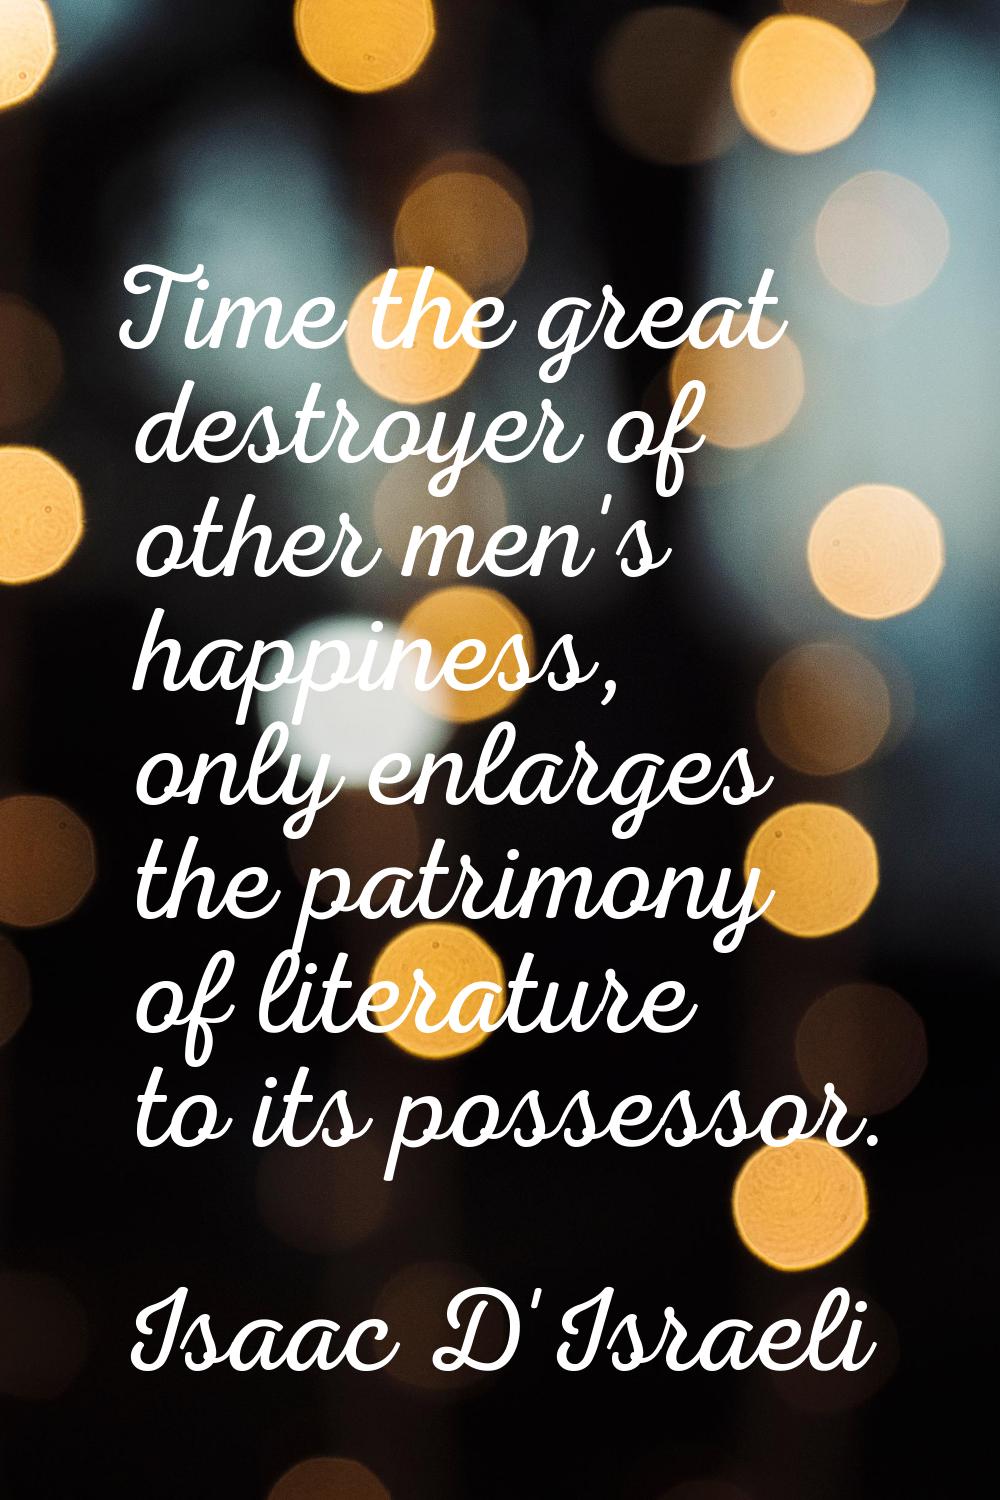 Time the great destroyer of other men's happiness, only enlarges the patrimony of literature to its